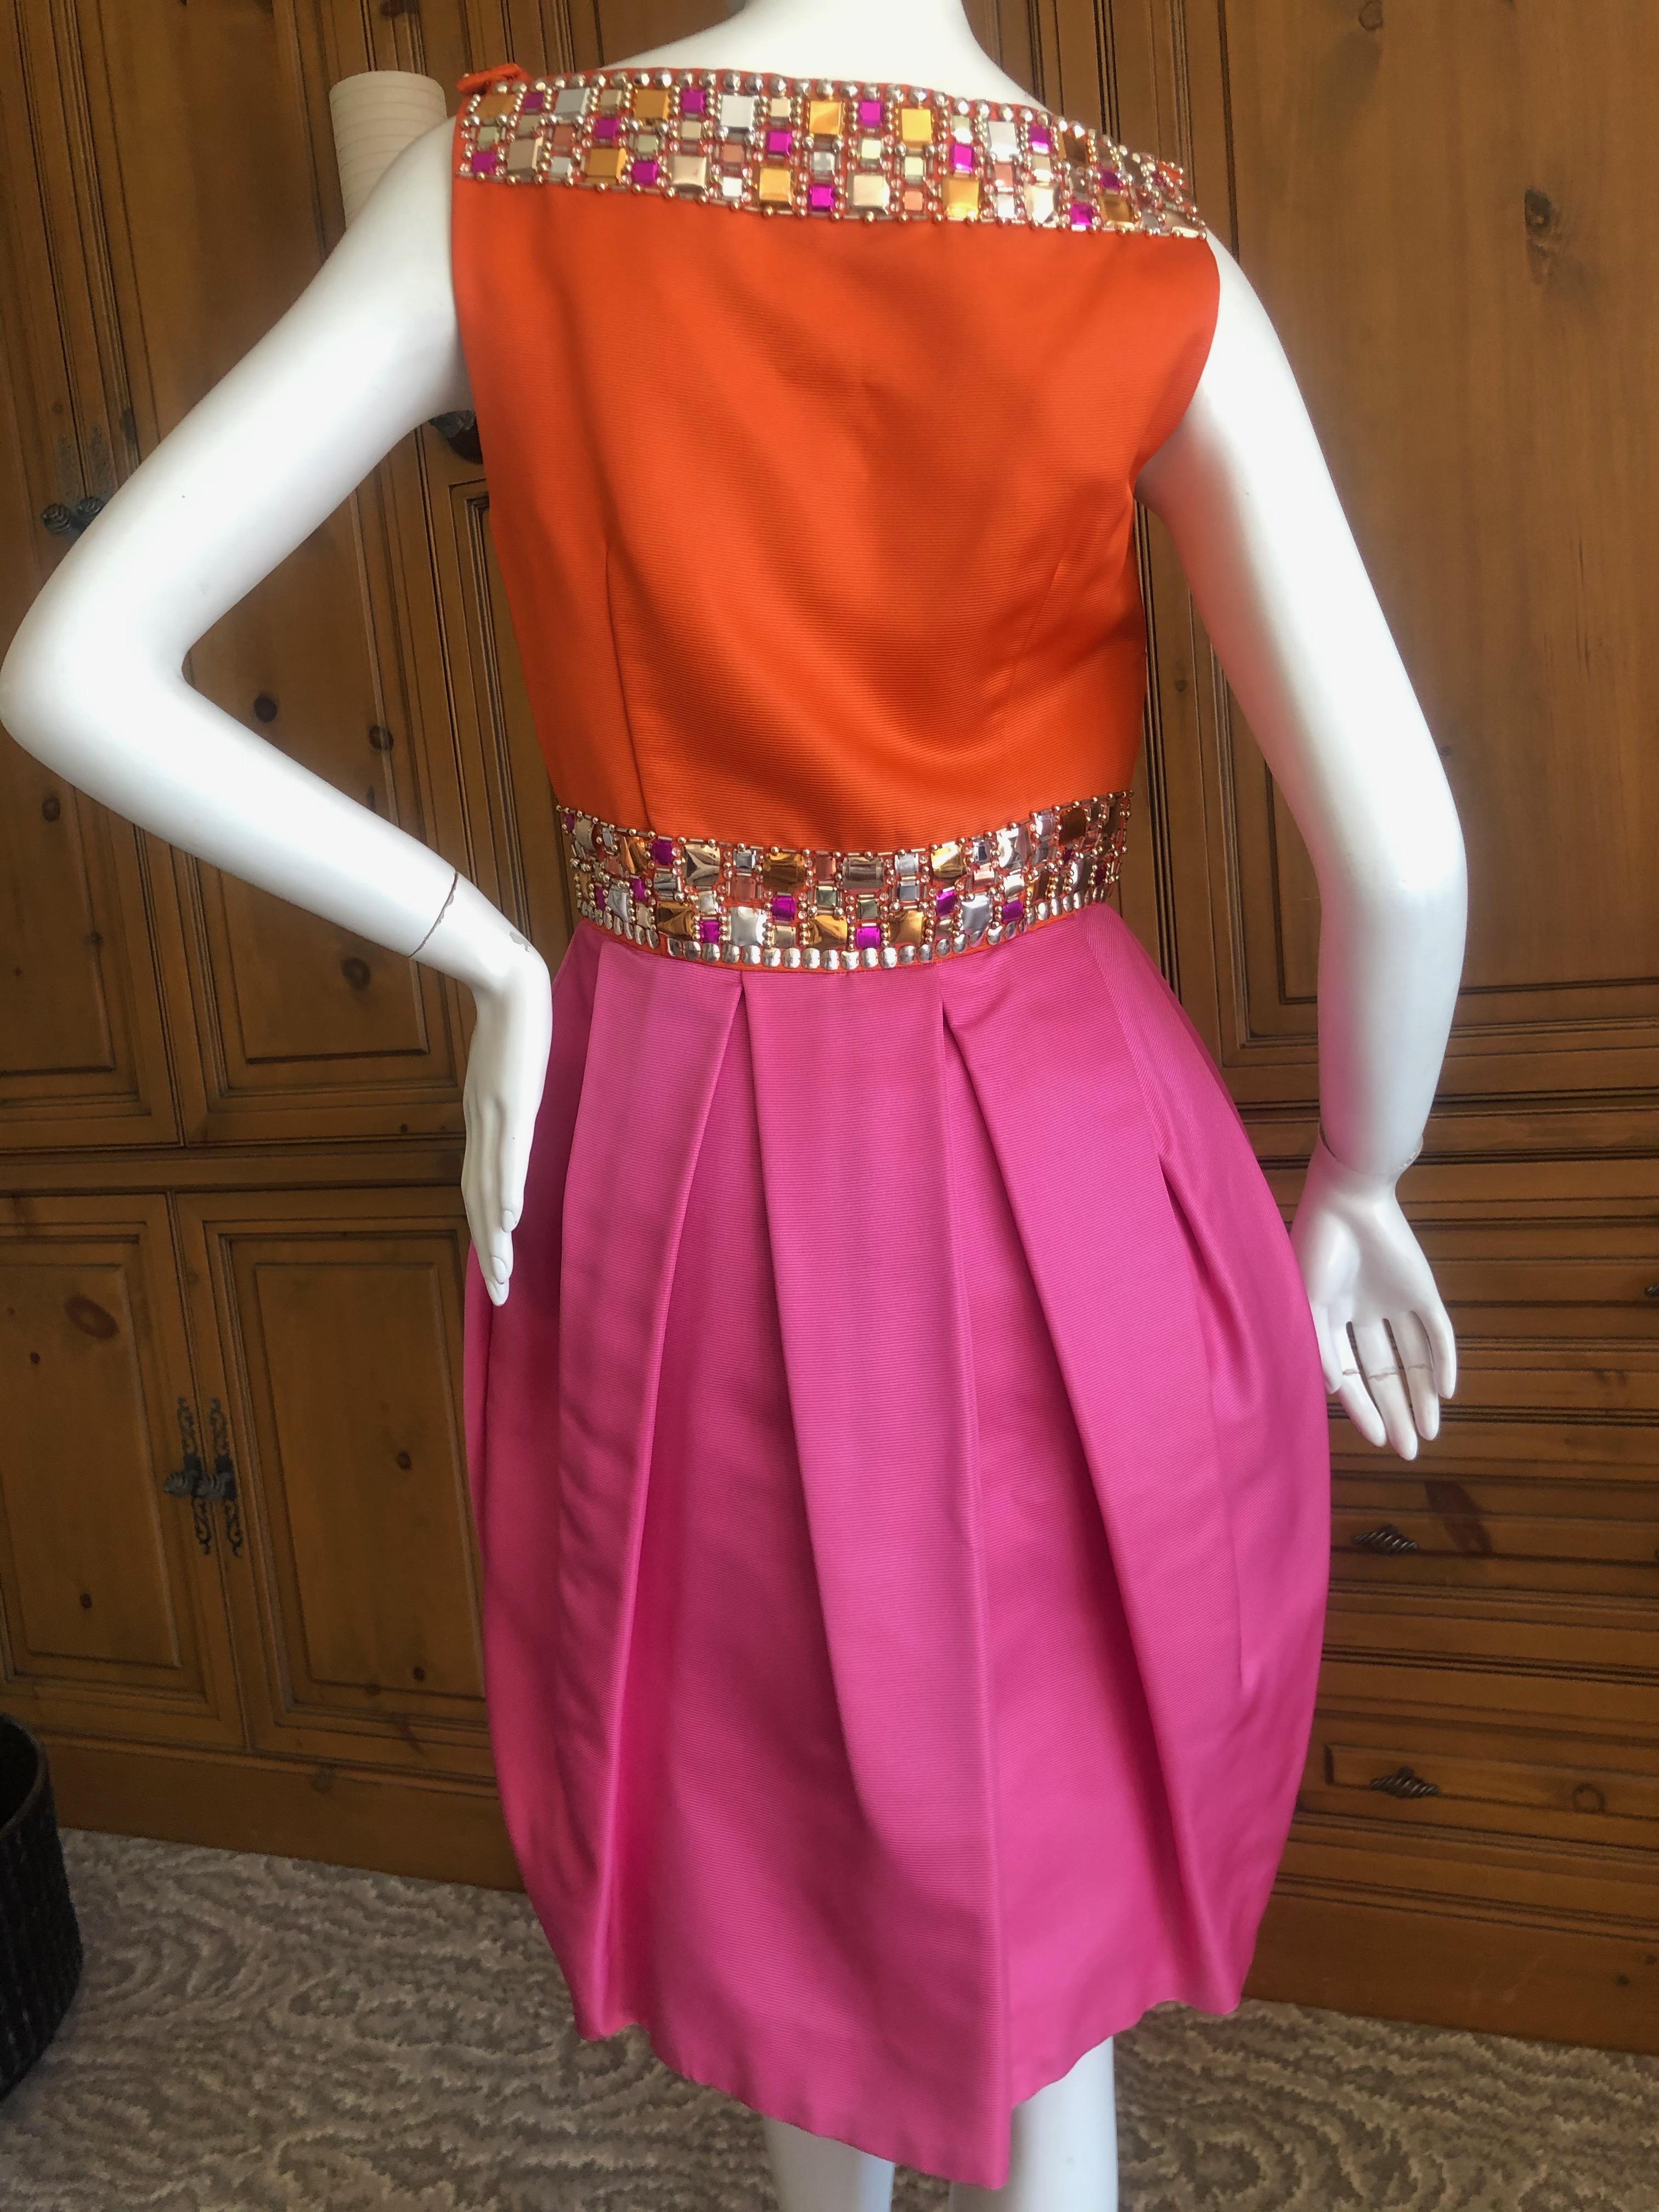  Dior by John Galliano Orange and Pink Silk Sixties Style Embellished Dress 4